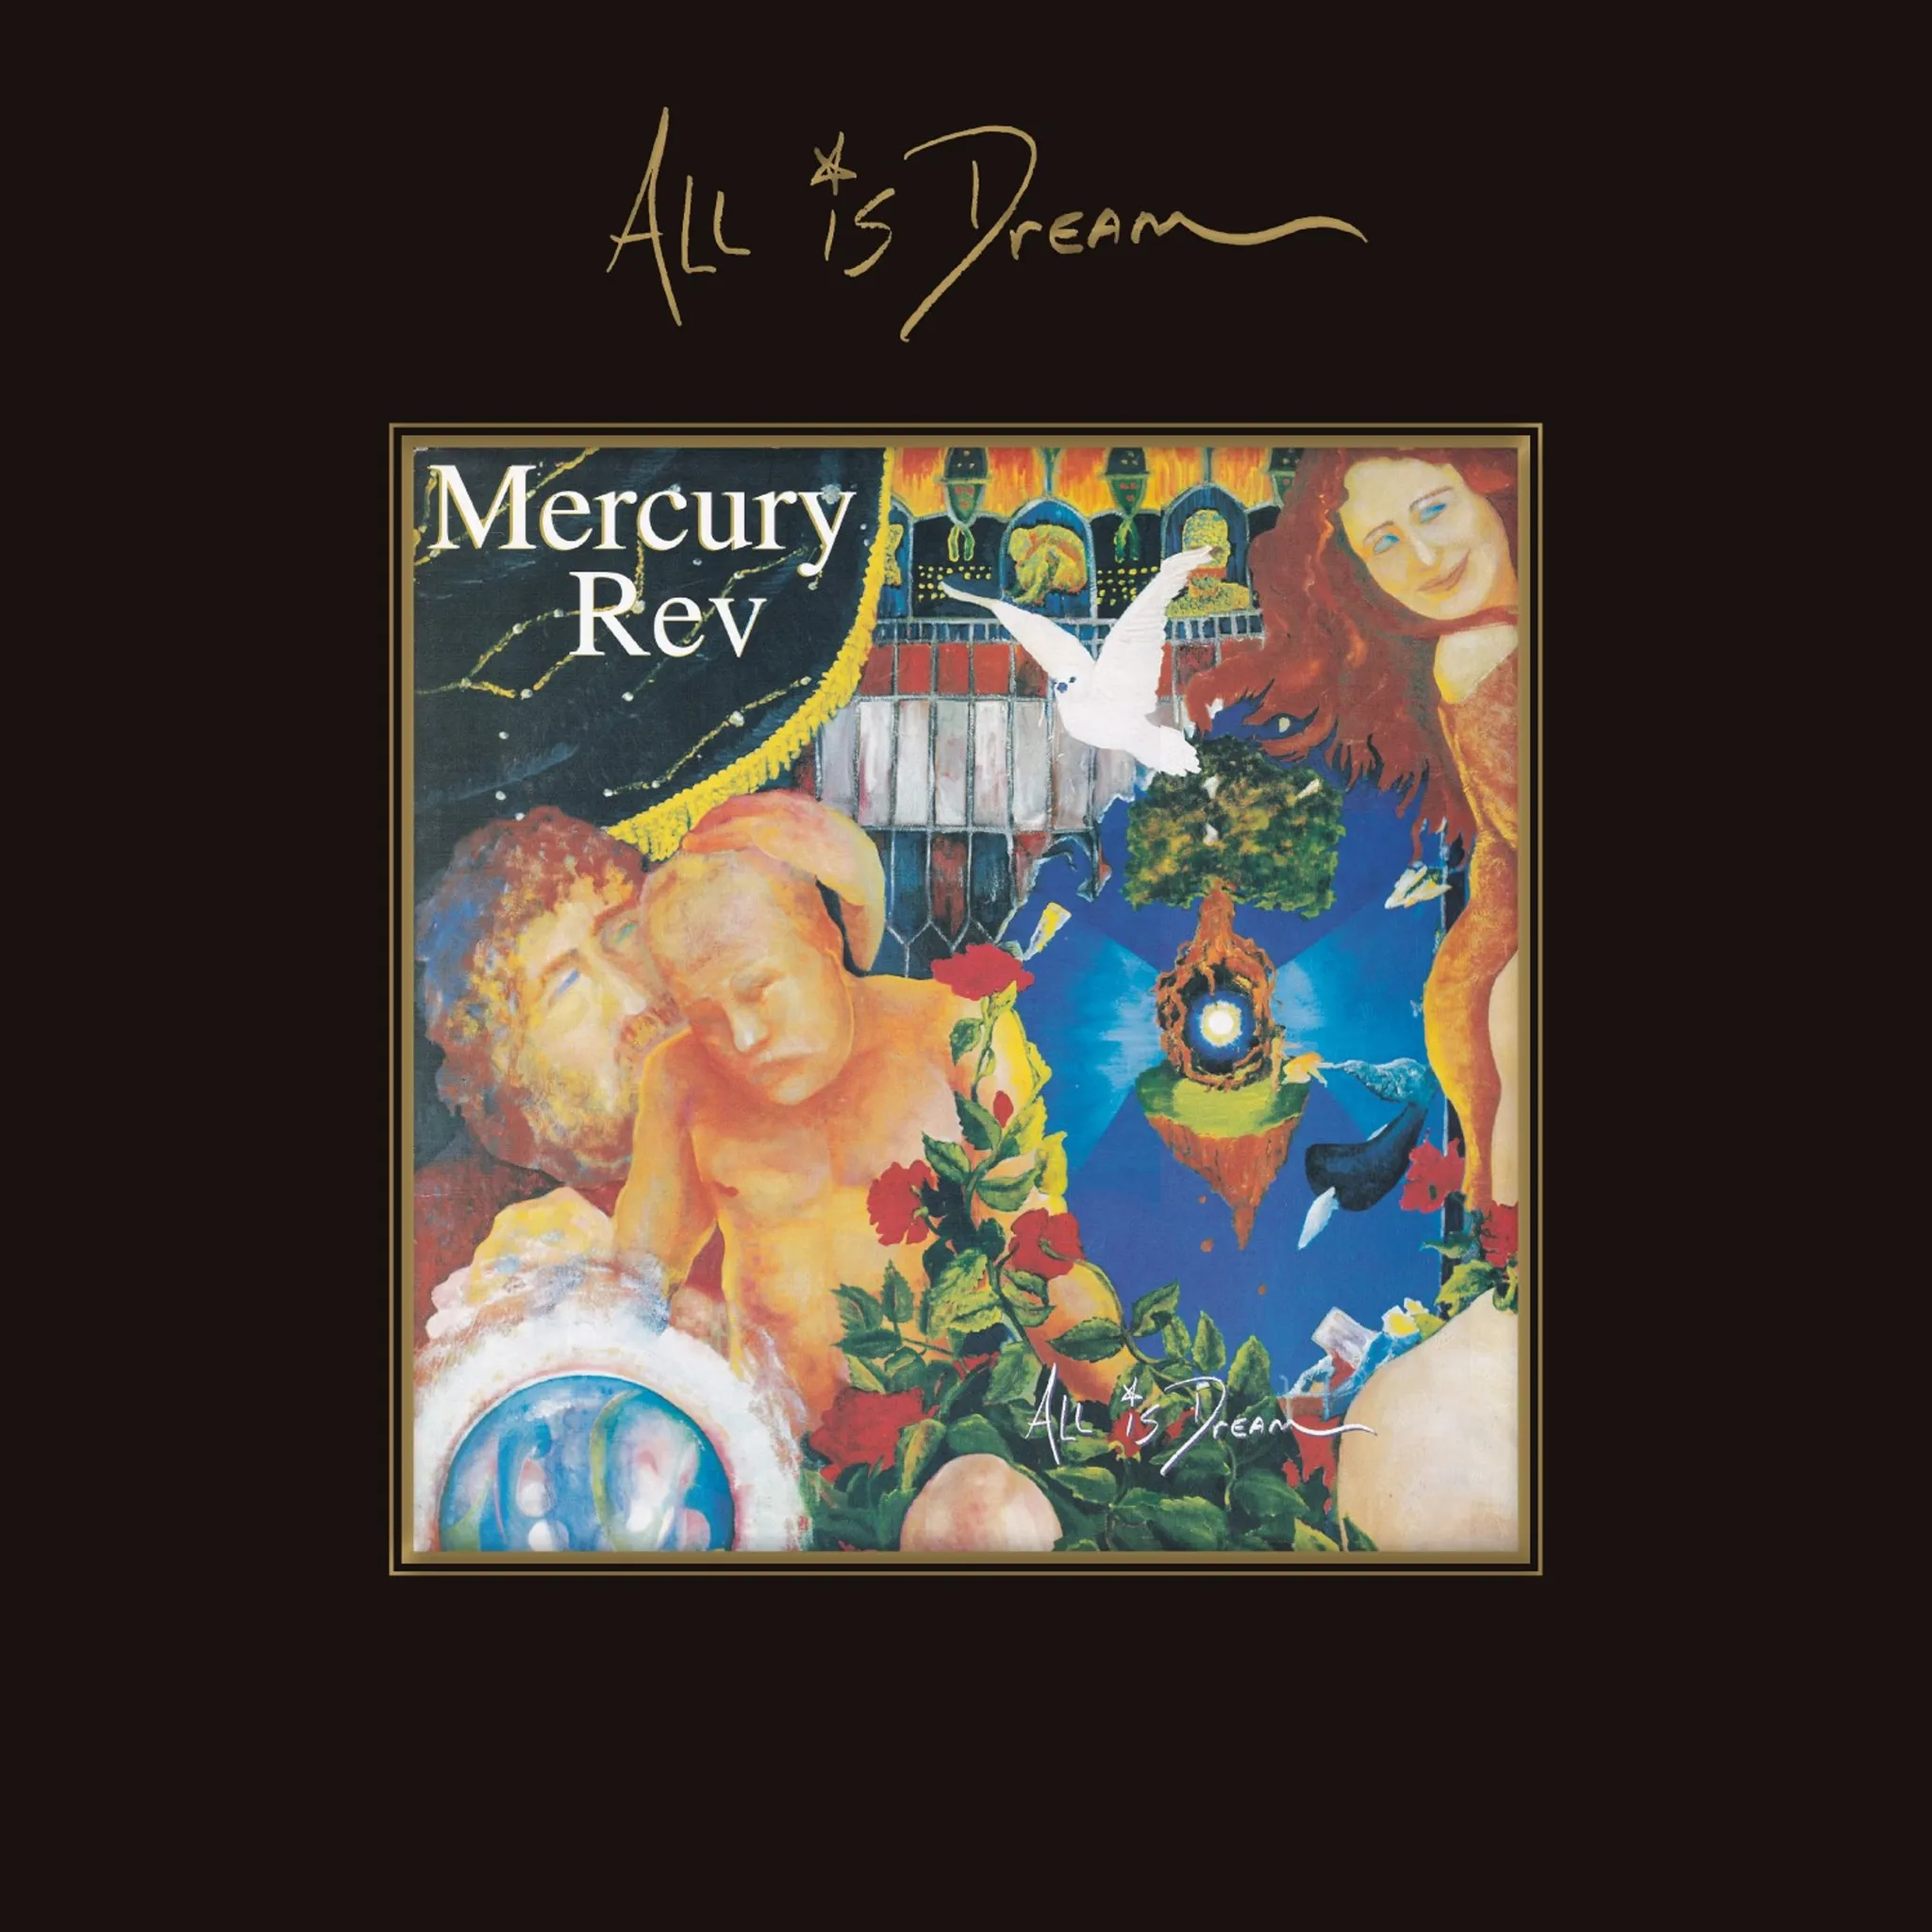 <strong>Mercury Rev - All is Dream - Deluxe</strong> (Cd)